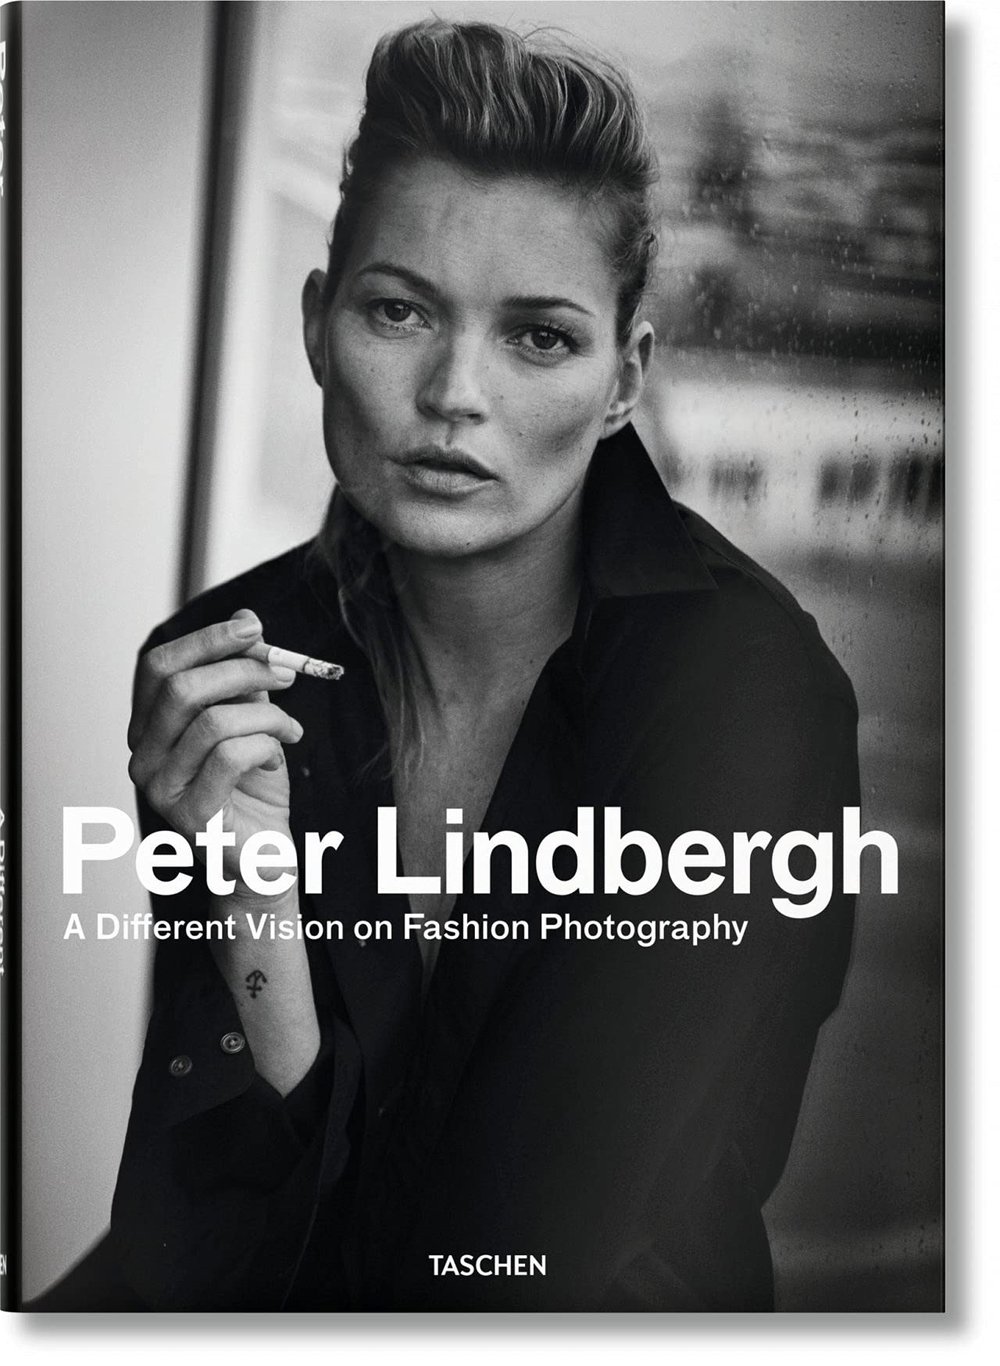 Peter Lindbergh by Thierry-Maxime Loriot